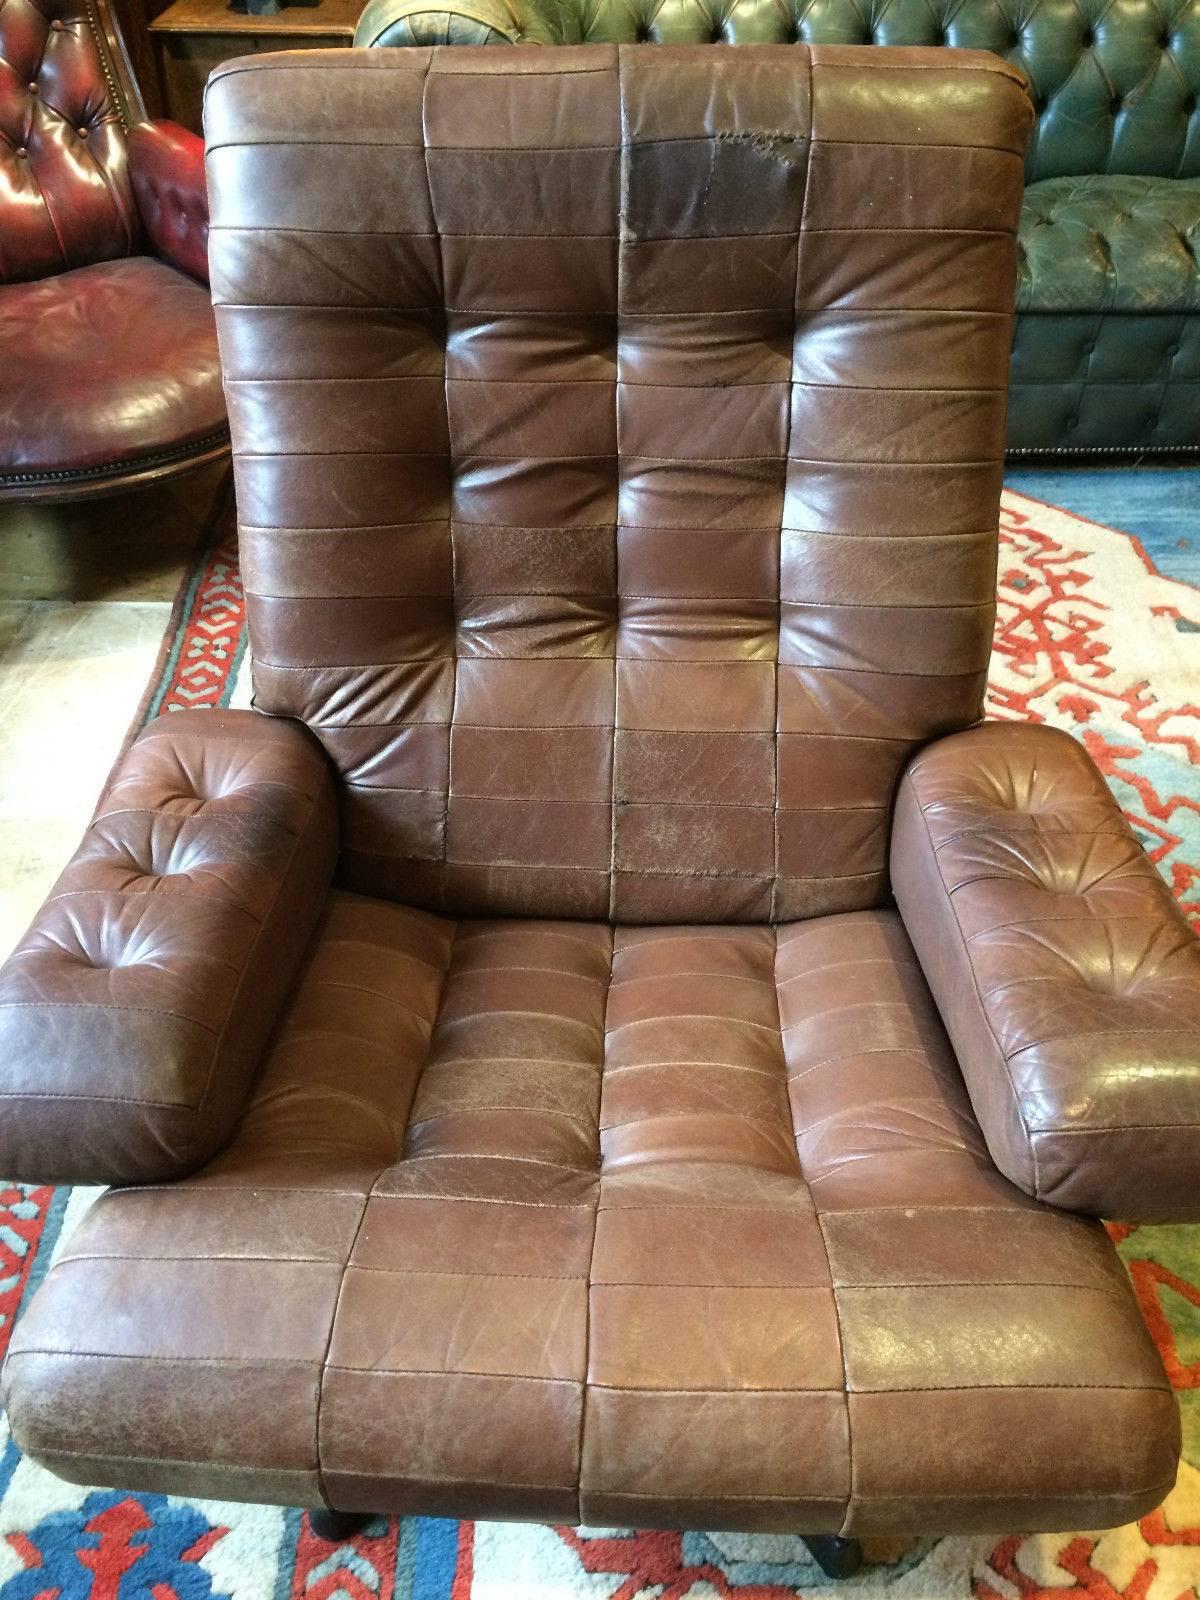 mobel sweden leather chair